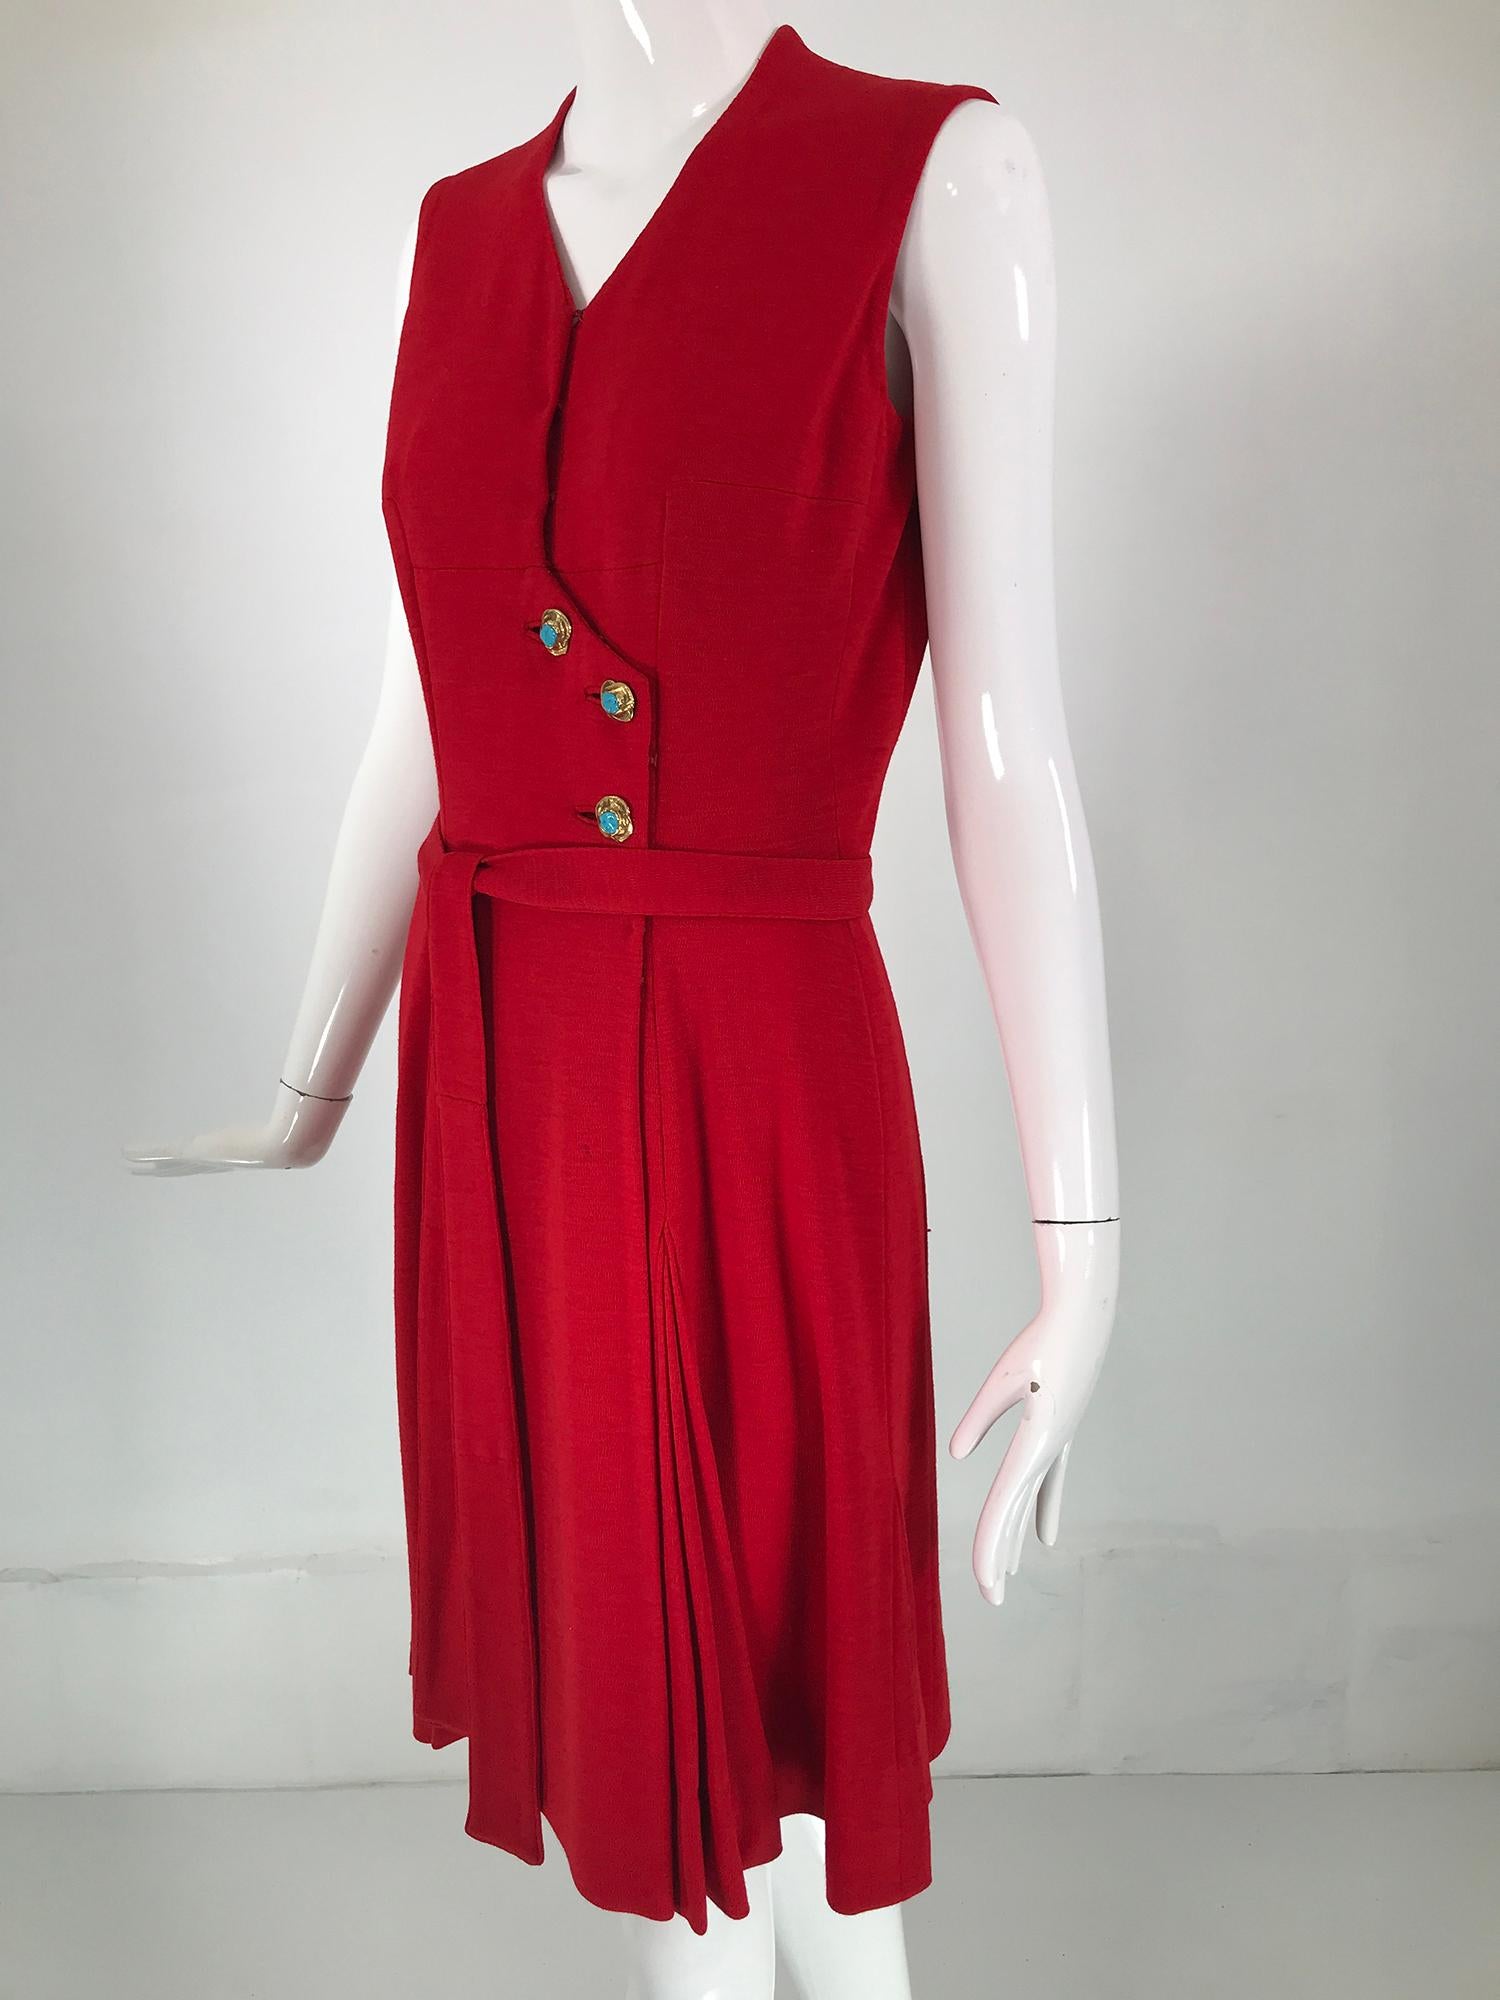 Coco Chanel Red Haute Couture 1950s 2 pc Wool Jersey Jewel Button Dress & Coat  For Sale 10